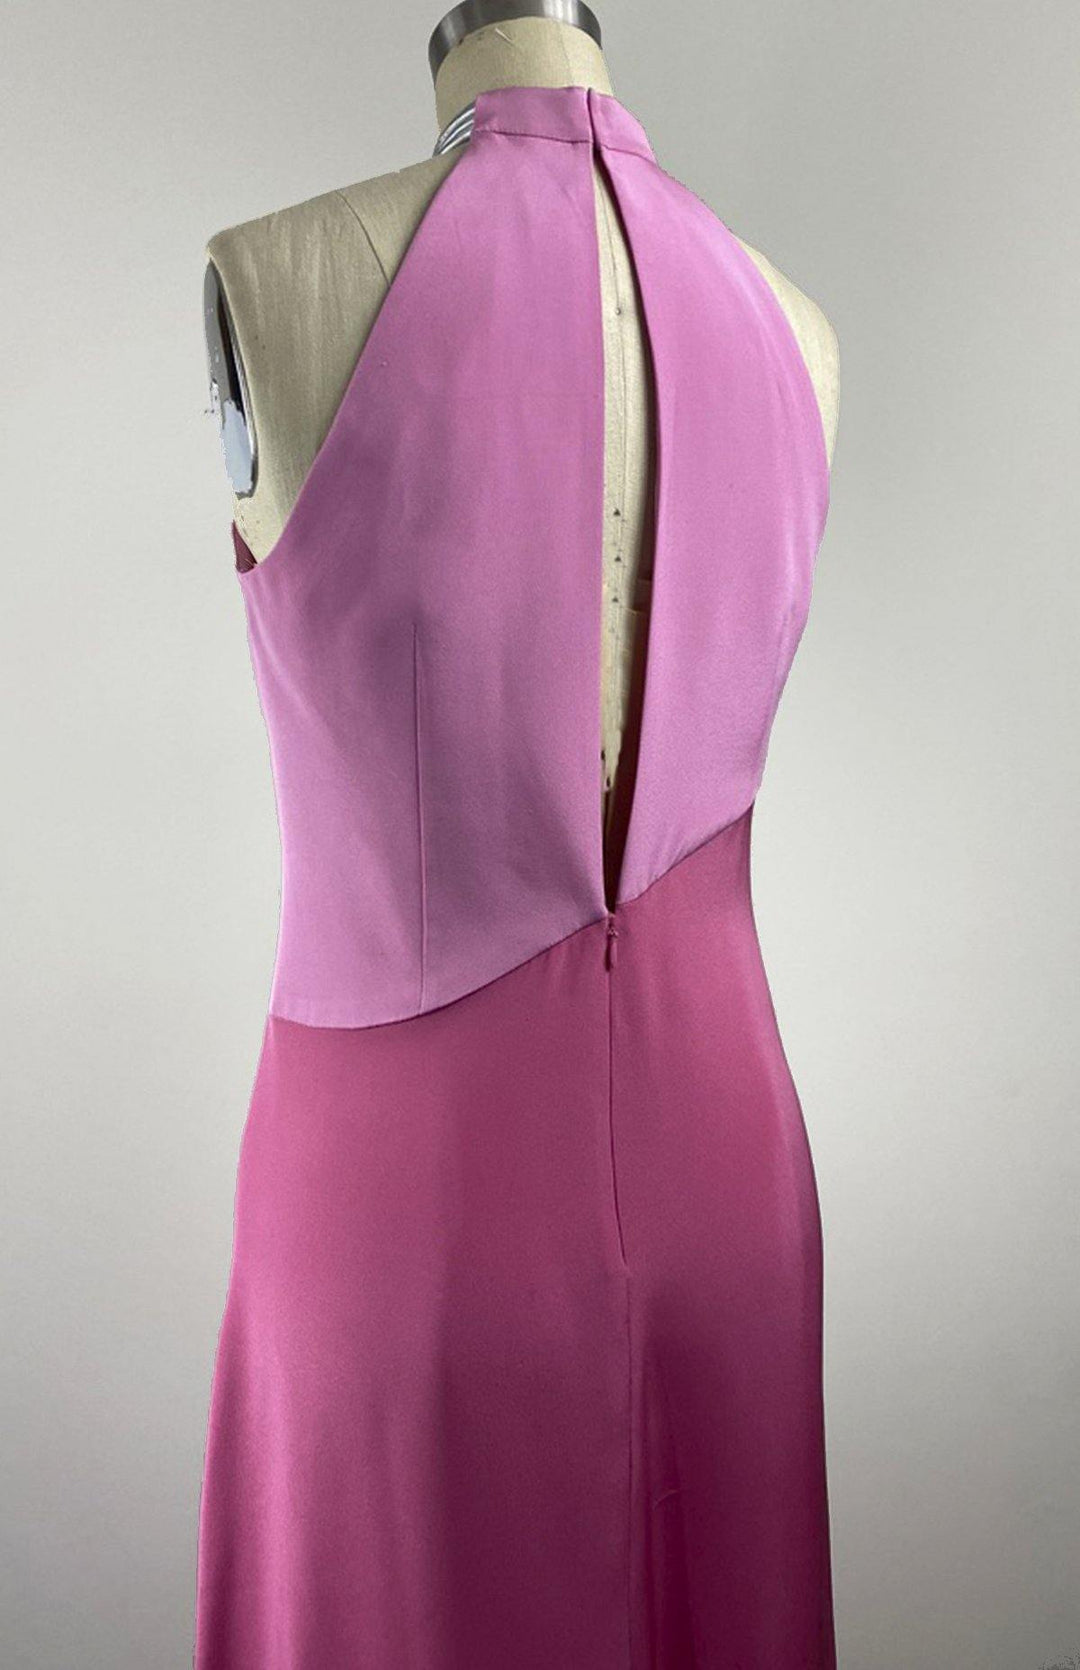 Pale pink and fuschia long, sleeveless, colorblock dress in double silk crepe with a futuristic silver neck trim detail. Back view